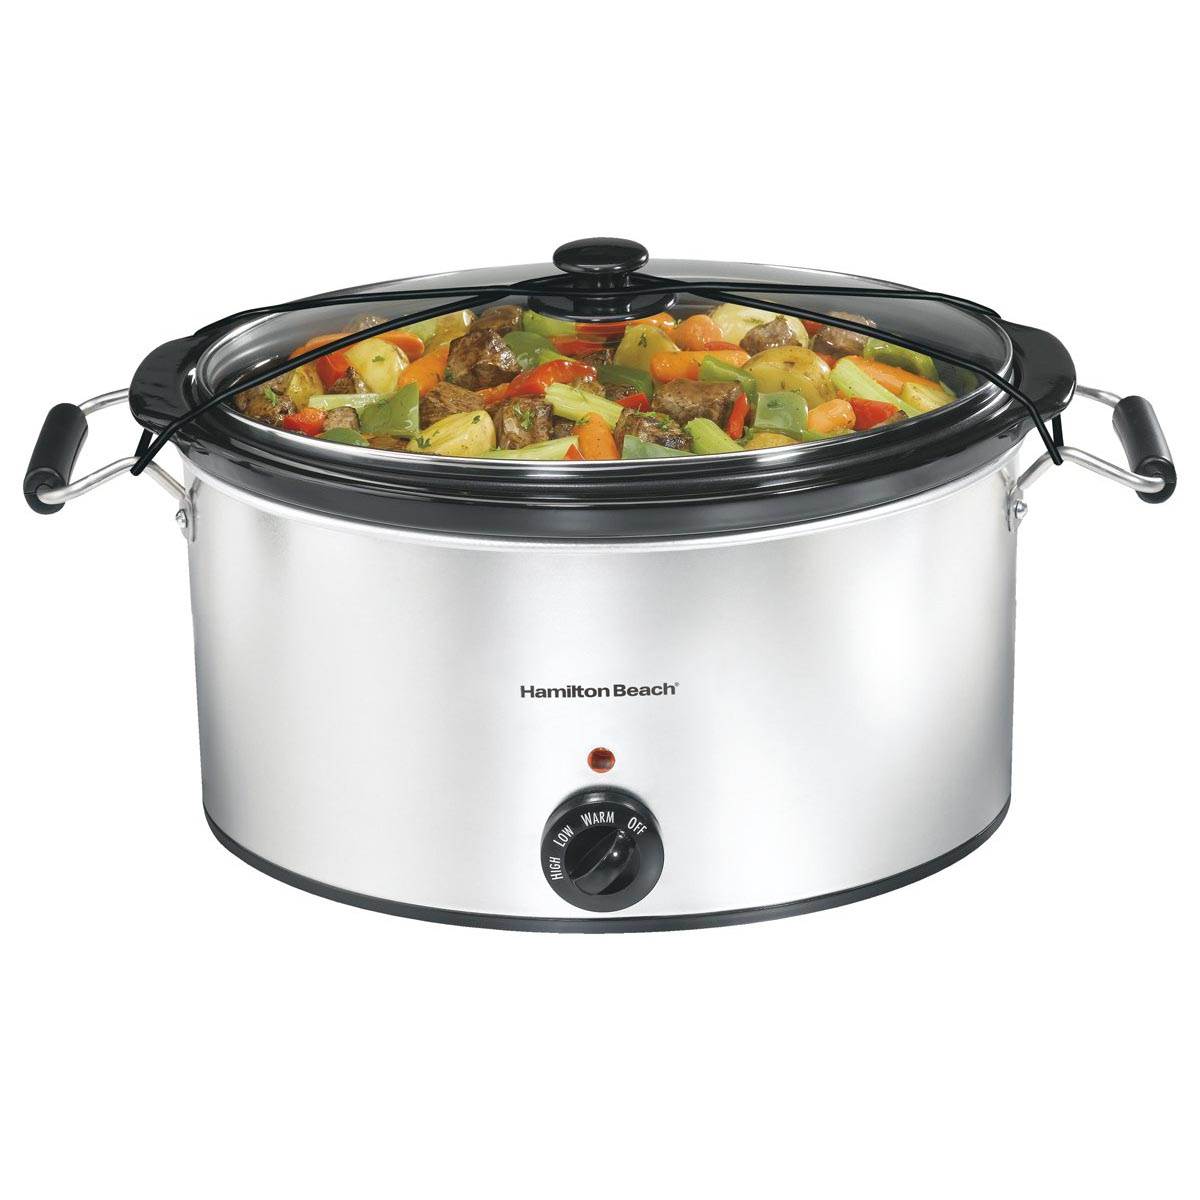 Hamilton Beach 7 Quart Classic Counter Top Oval Slow Cooker With Lid 